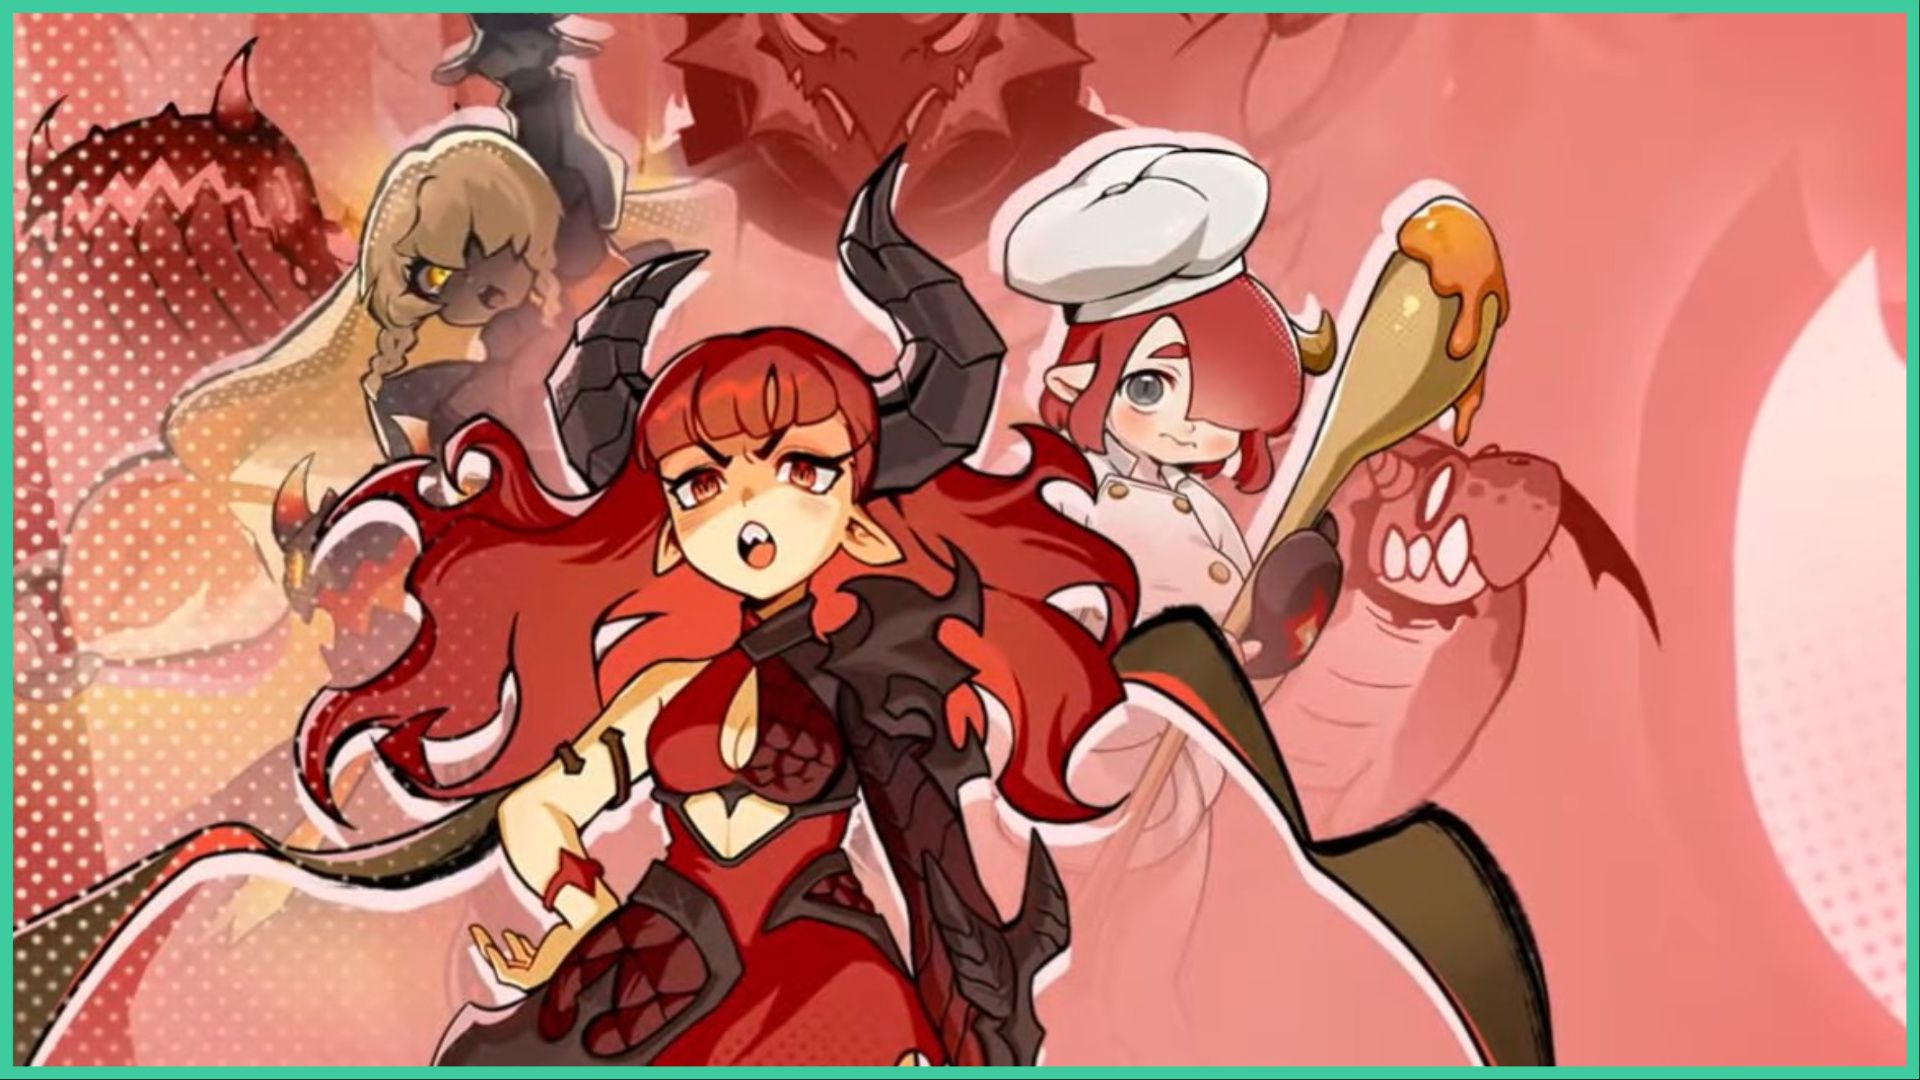 screenshot from the fafner trailer for out dragon pow tier list, the art is of the fafner dragon in her human form as she scowls and points her eyebrows downward, she has large curved horns, flowing red hair, and her armor has dragon scales, there is a character to her right with a surprised expression whilst wearing a chef outfit and hat, with a spoon in hand that has a liquid dripping off of it, there is also a faint drawing of a dragon behind them